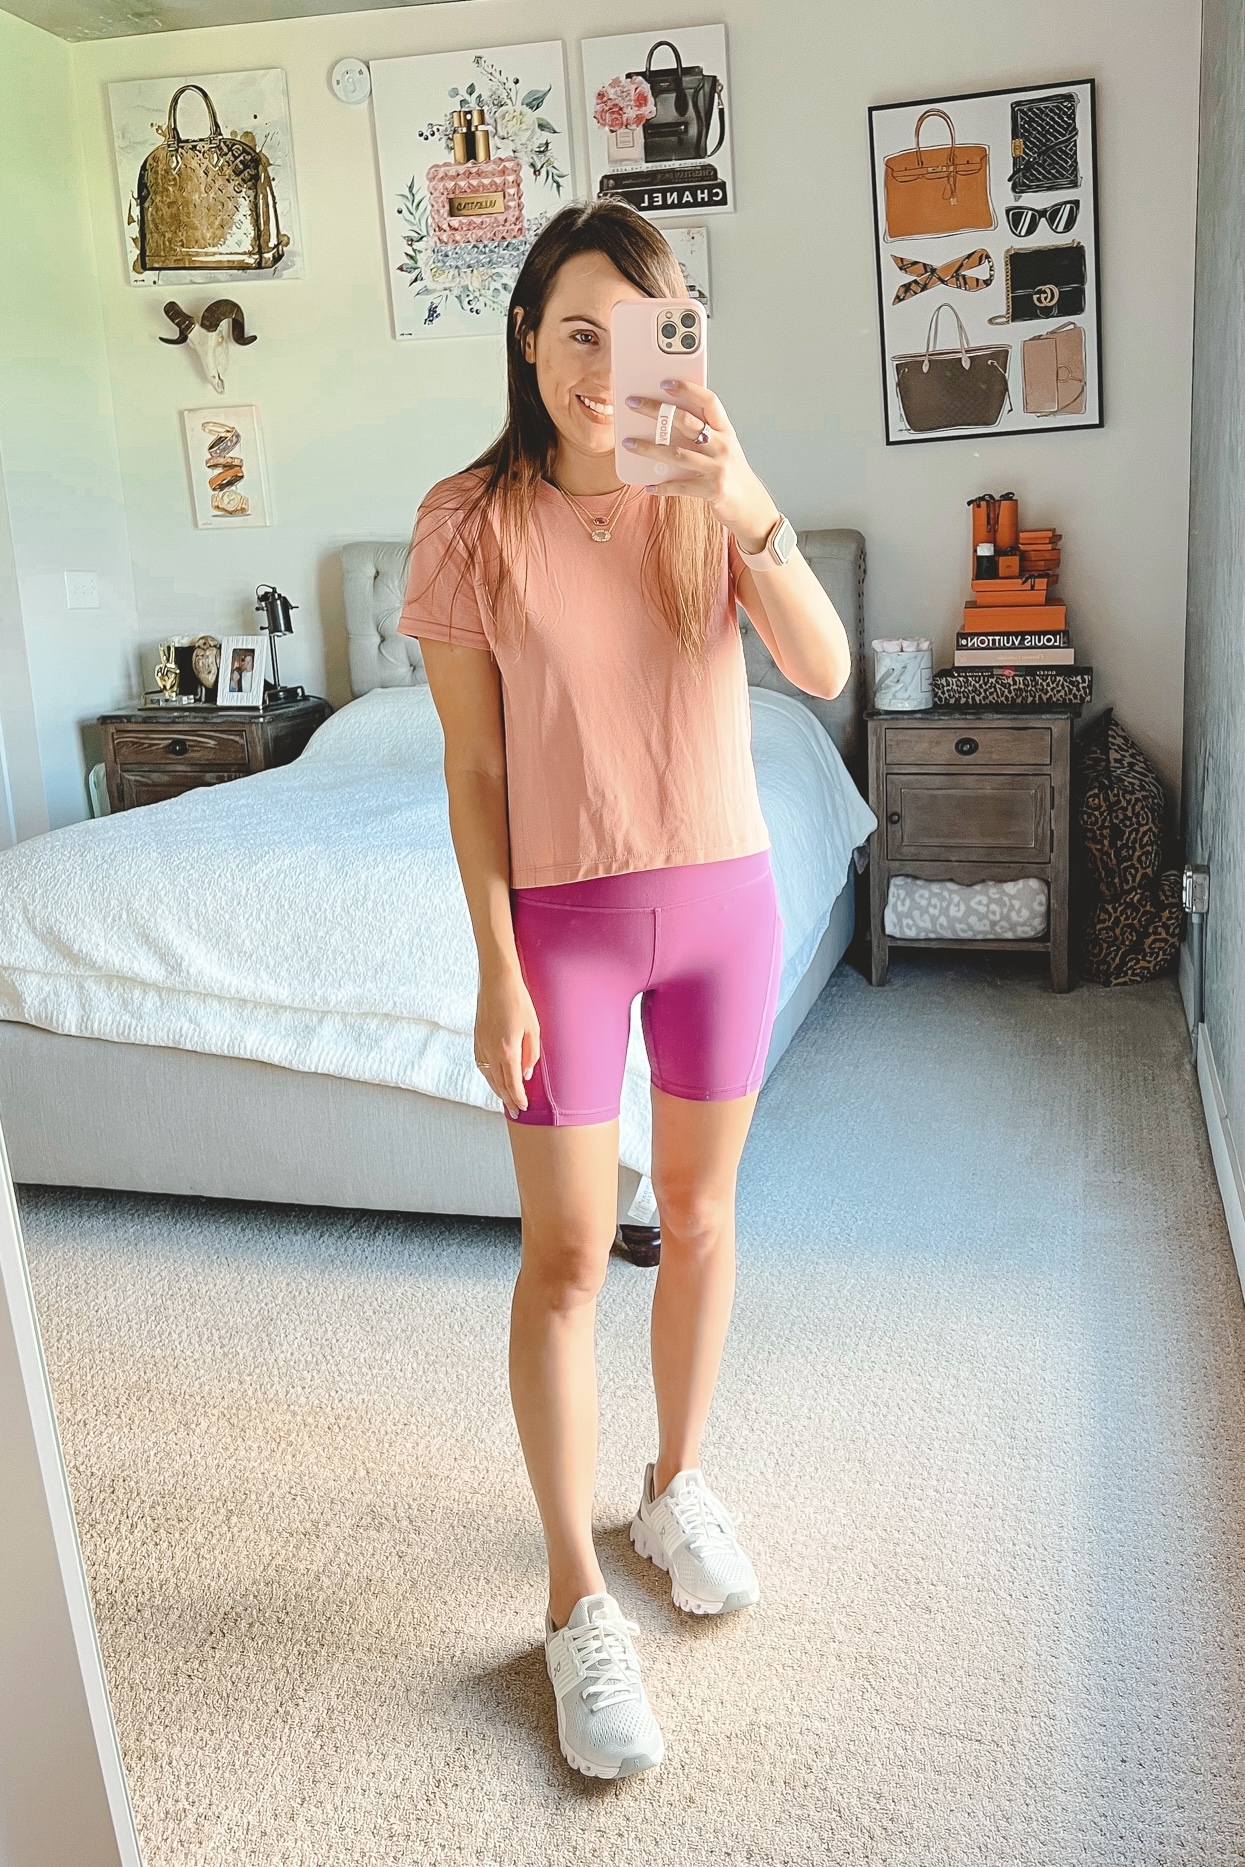 Align 6 inch shorts are my new favorite 🤩 took me long enough to try a  pair! : r/lululemon